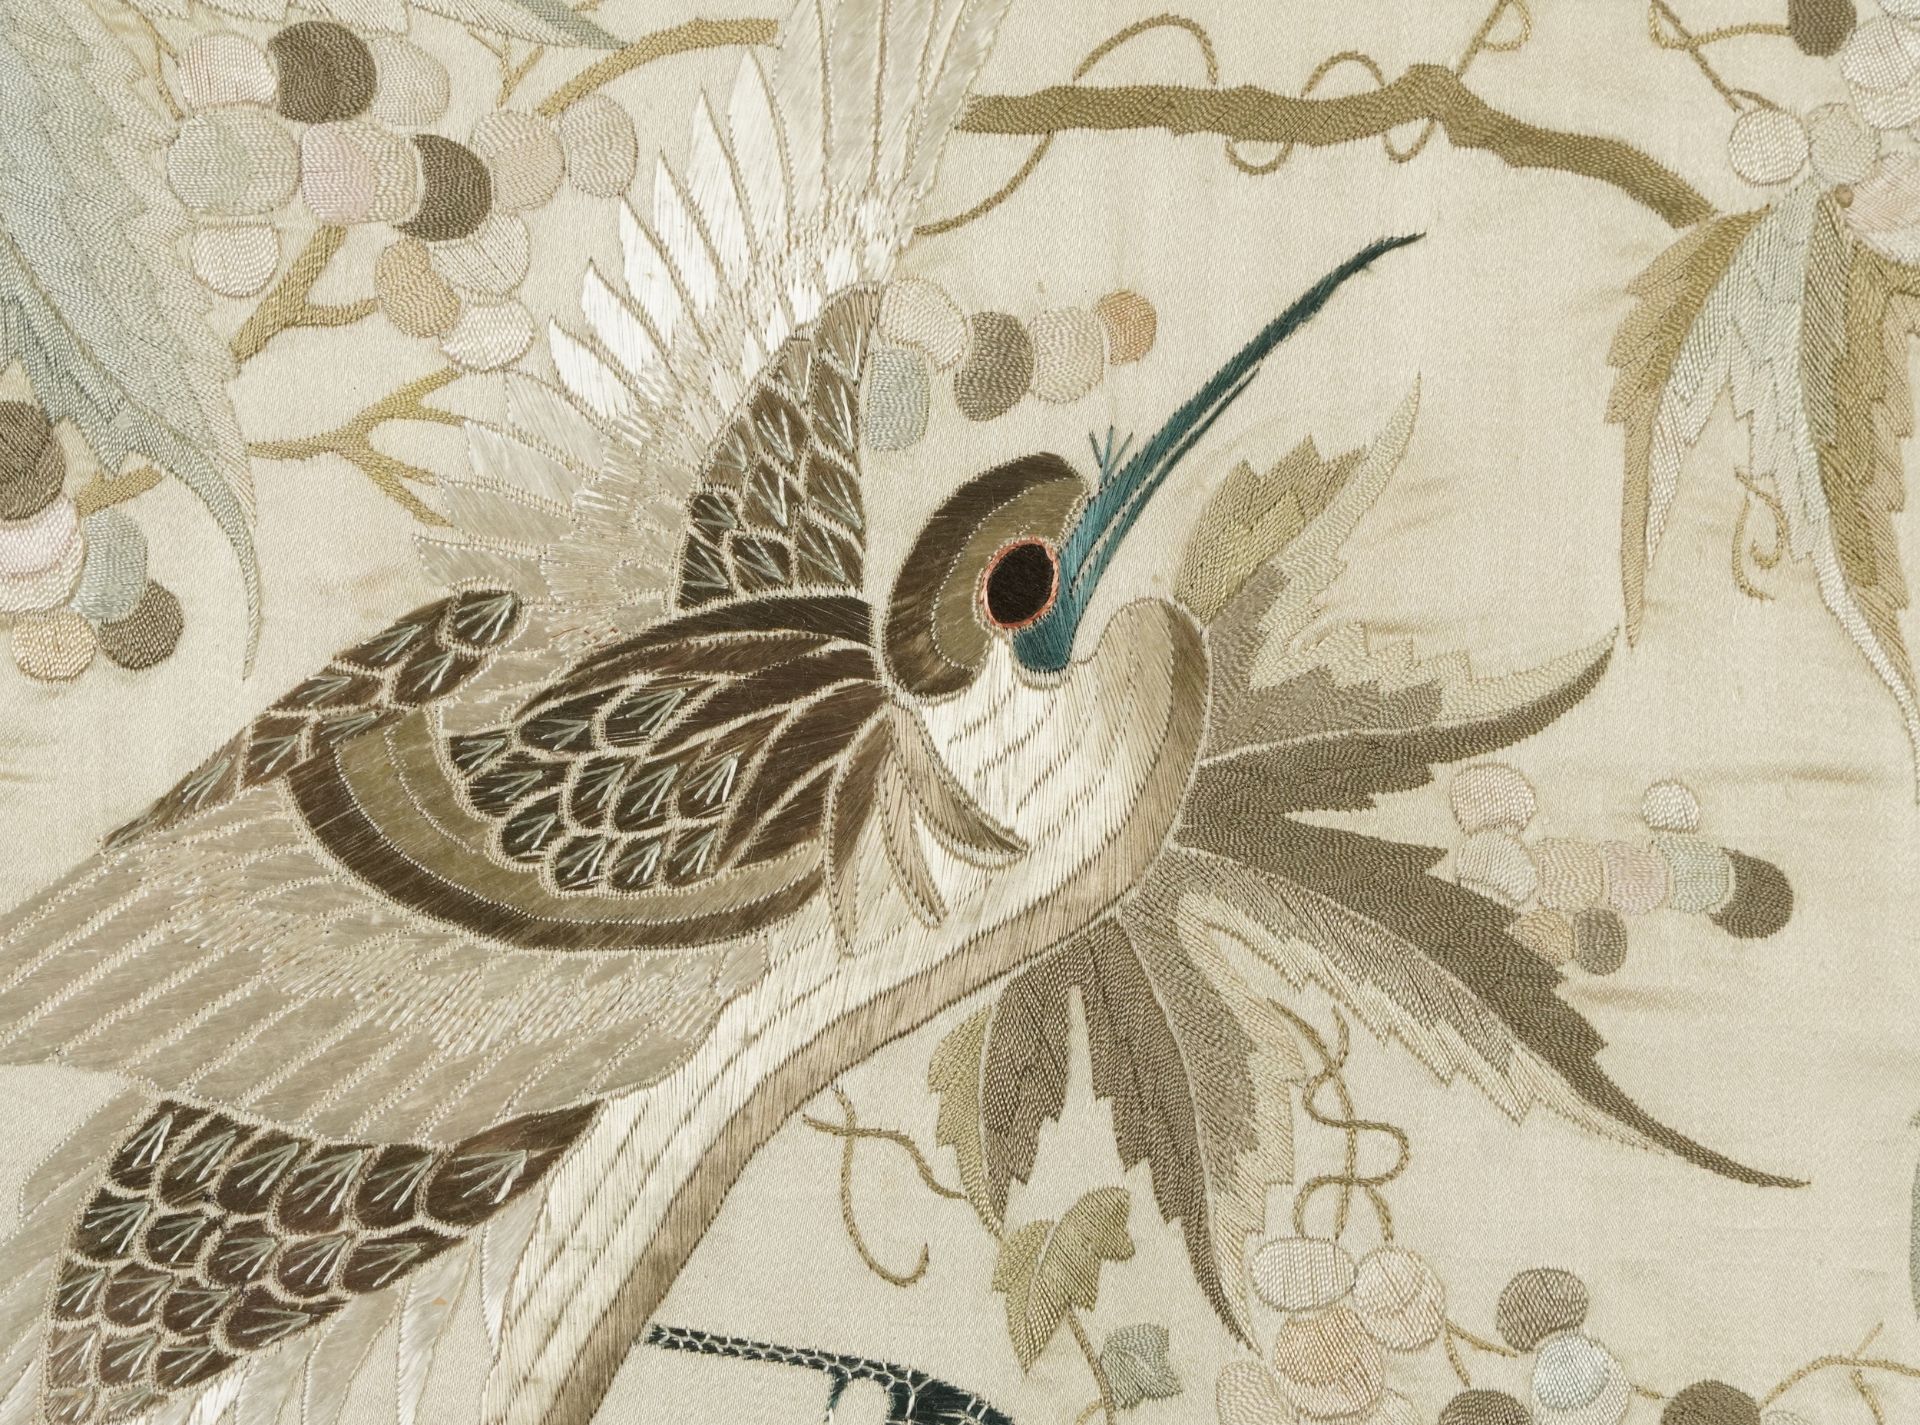 Oriental silkwork picture of an exotic bird, insects, flowers and berries housed in a mahogany frame - Image 3 of 4